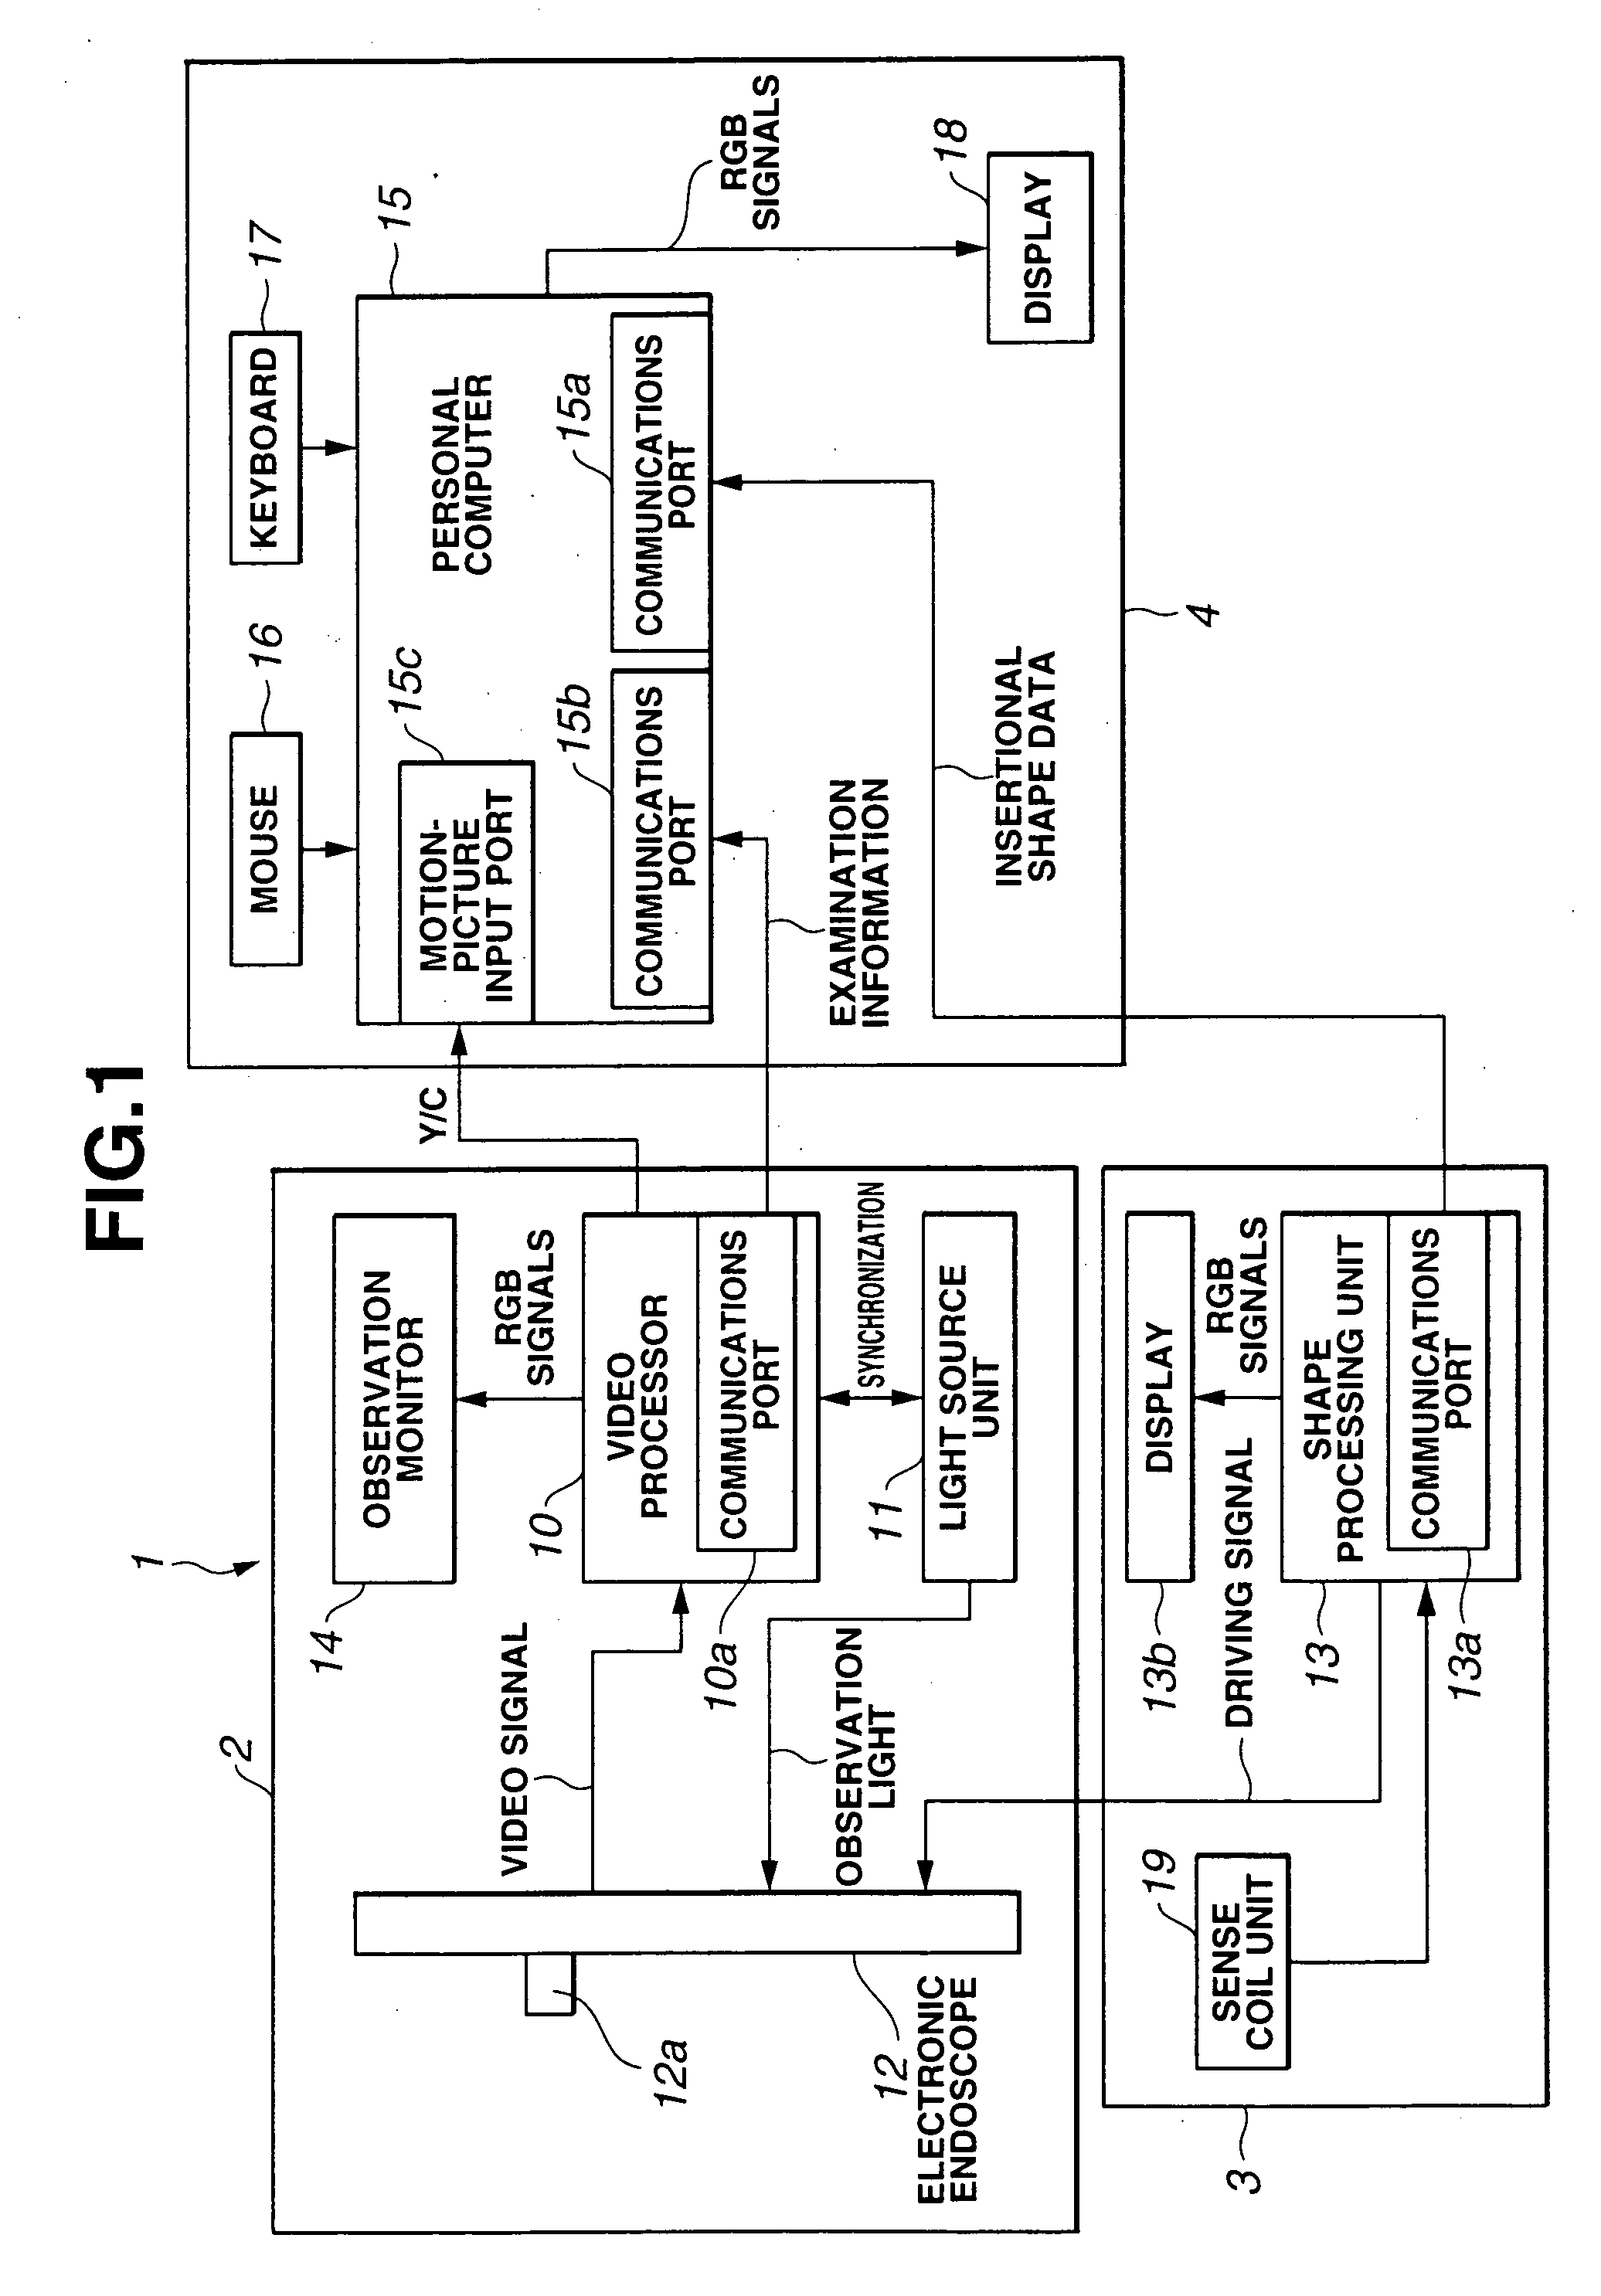 Endoscope information processor and processing method